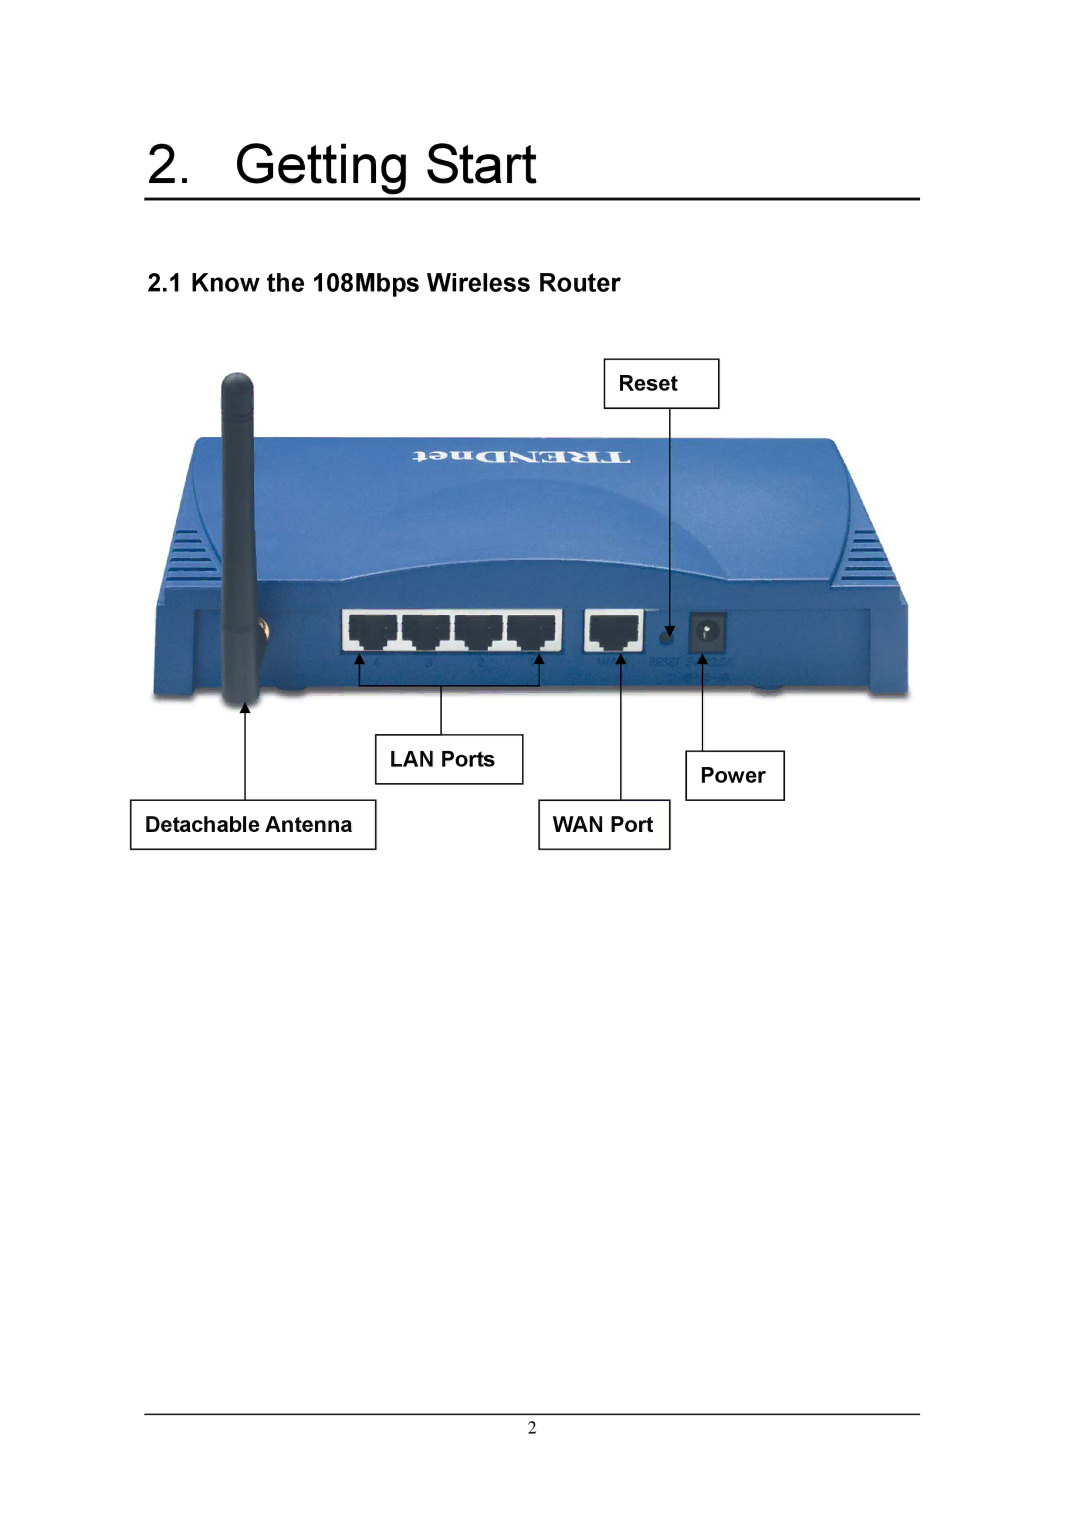 TRENDnet 108Mbps 802.11g Wireless Firewall Router, TEW-452BRP manual Know the 108Mbps Wireless Router 